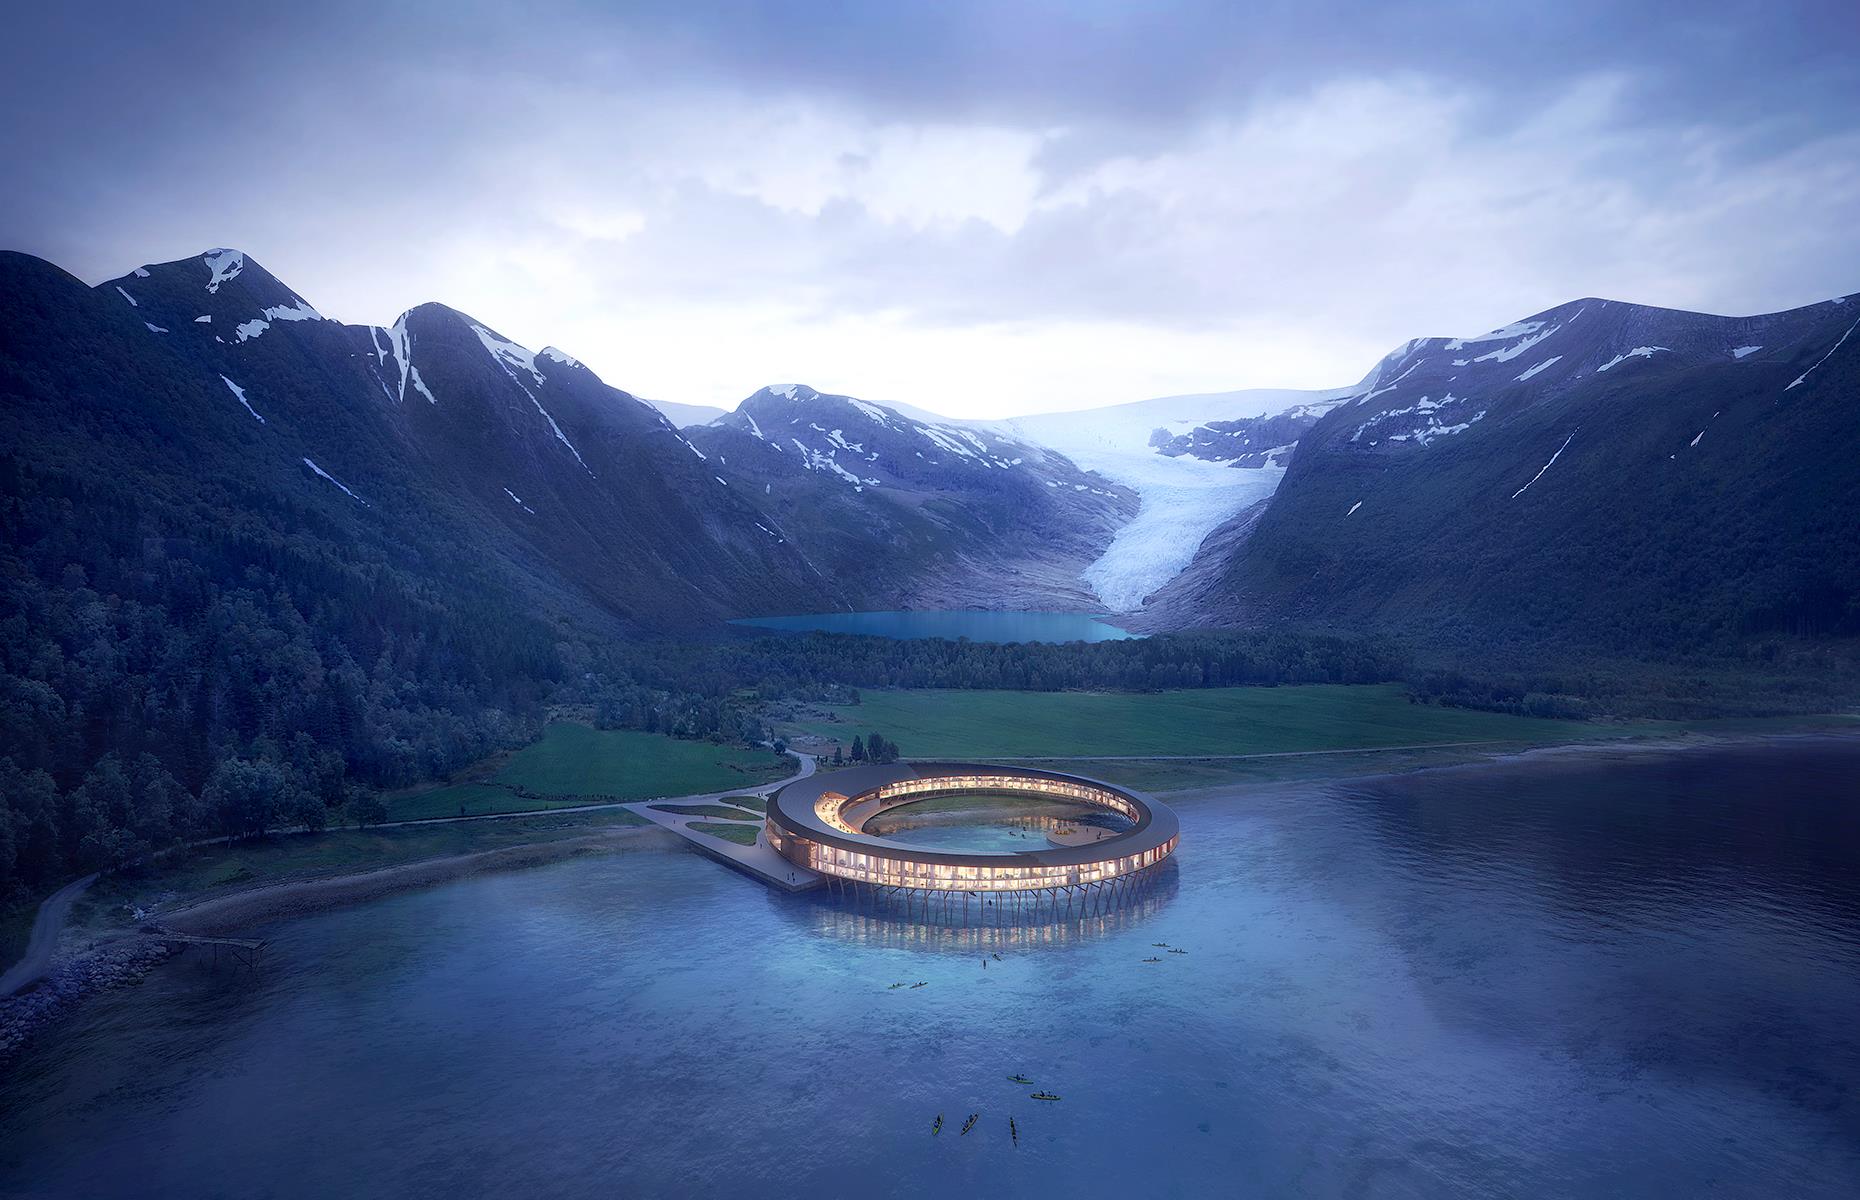 <p>If you’re dreaming of getting far off the grid, this might be just the place. Set in the Arctic wilds of Norway, <a href="https://www.svart.no/">Svart</a>, designed by architecture firm Snøhetta, is tipped as the world’s very first energy positive hotel. Solar panels line the venue’s sleek roof and, according to its creators, the hotel will reap enough solar energy to cover its operations and its construction too. </p>  <p><a href="https://www.loveexploring.com/galleries/84953/the-worlds-most-remote-hotels?page=1"><strong>These are the most remote hotels in the world</strong></a></p>